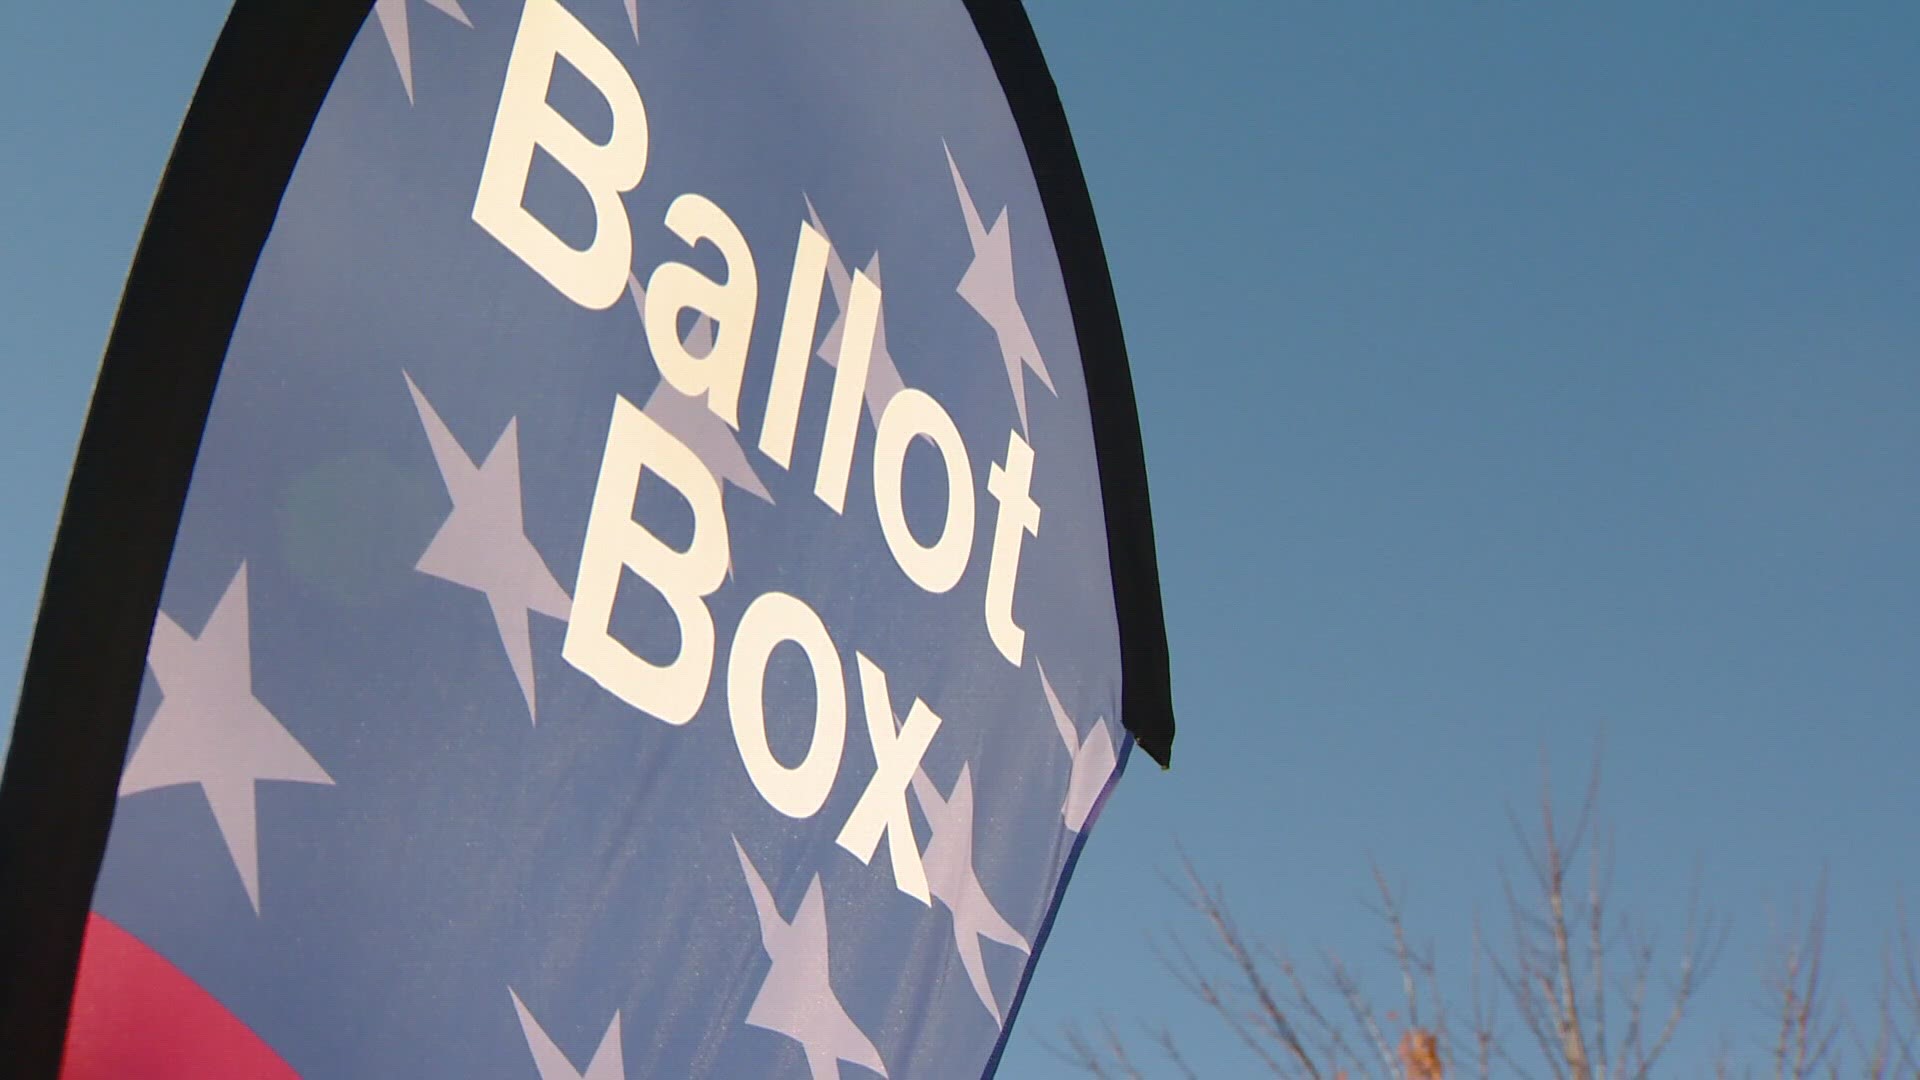 This November's election includes two statewide ballot measures, along with mayor, city council and school board races.